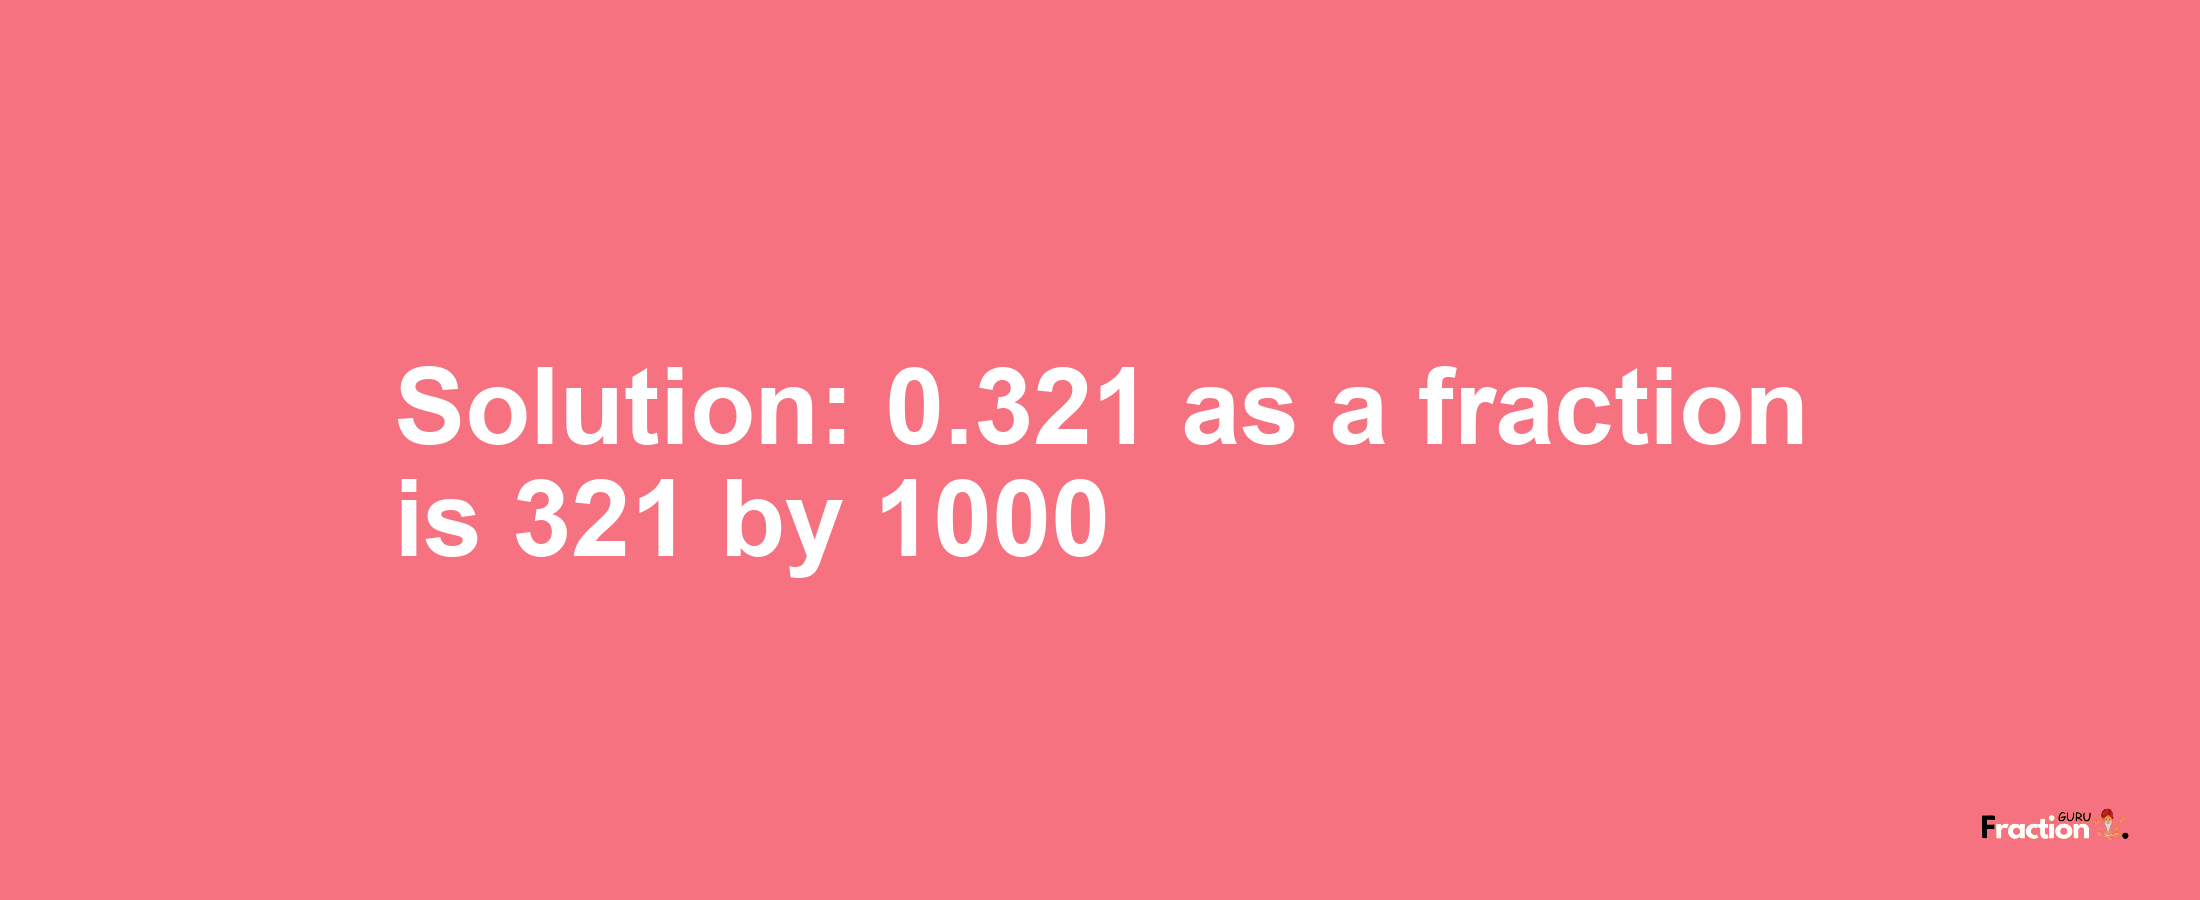 Solution:0.321 as a fraction is 321/1000